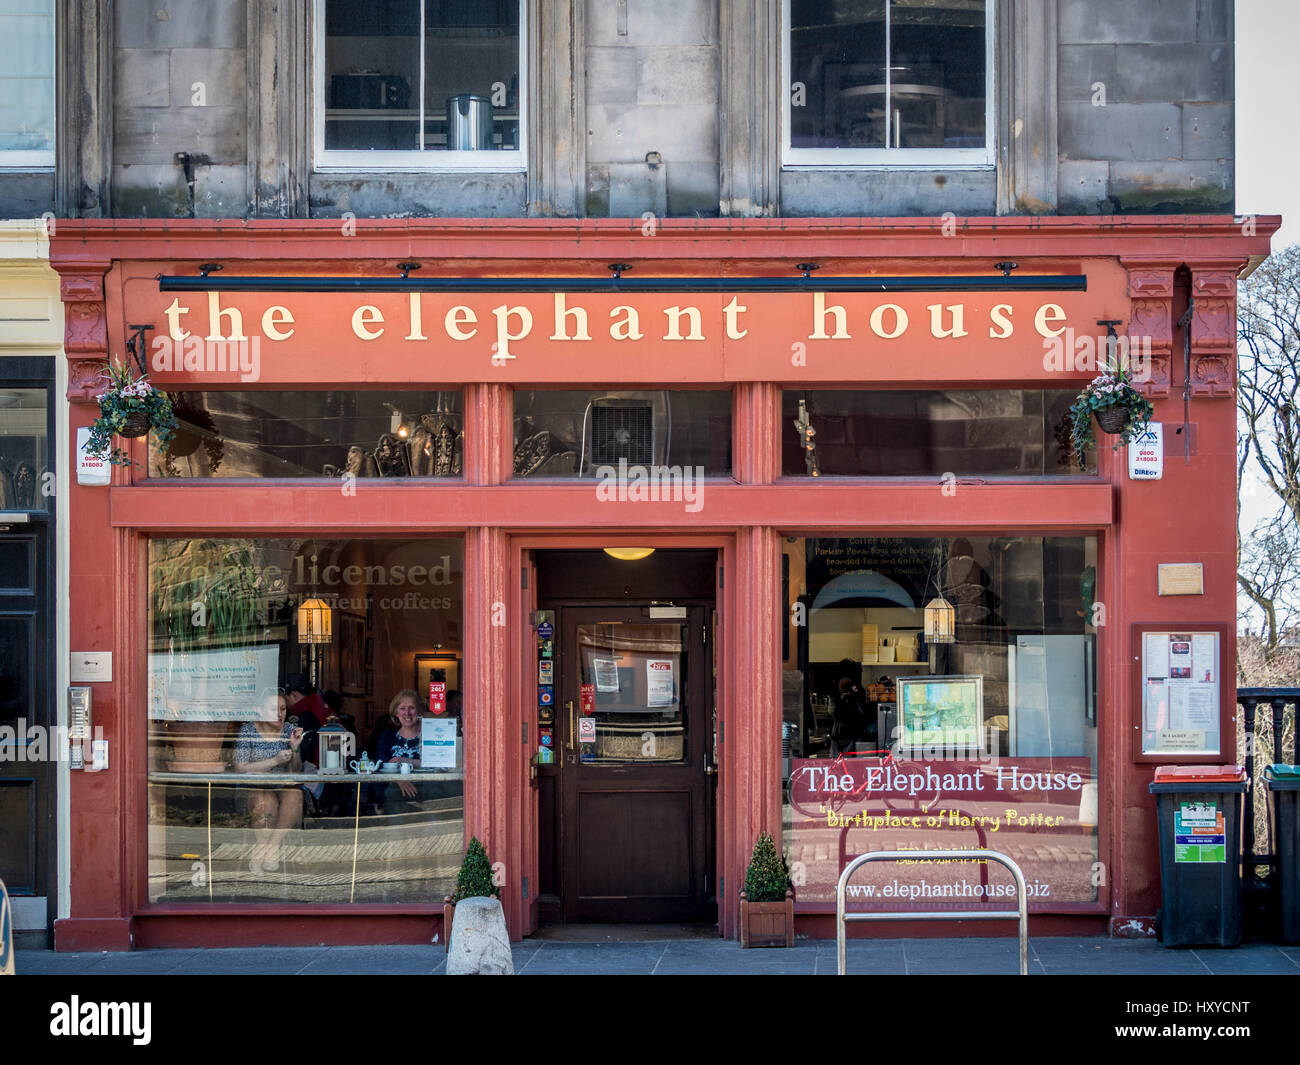 The Elephant House cafe Edinburgh. Made famous as the place of inspiration to writers such as J.K. Rowling, who wrote the Harry Potter books here. Stock Photo